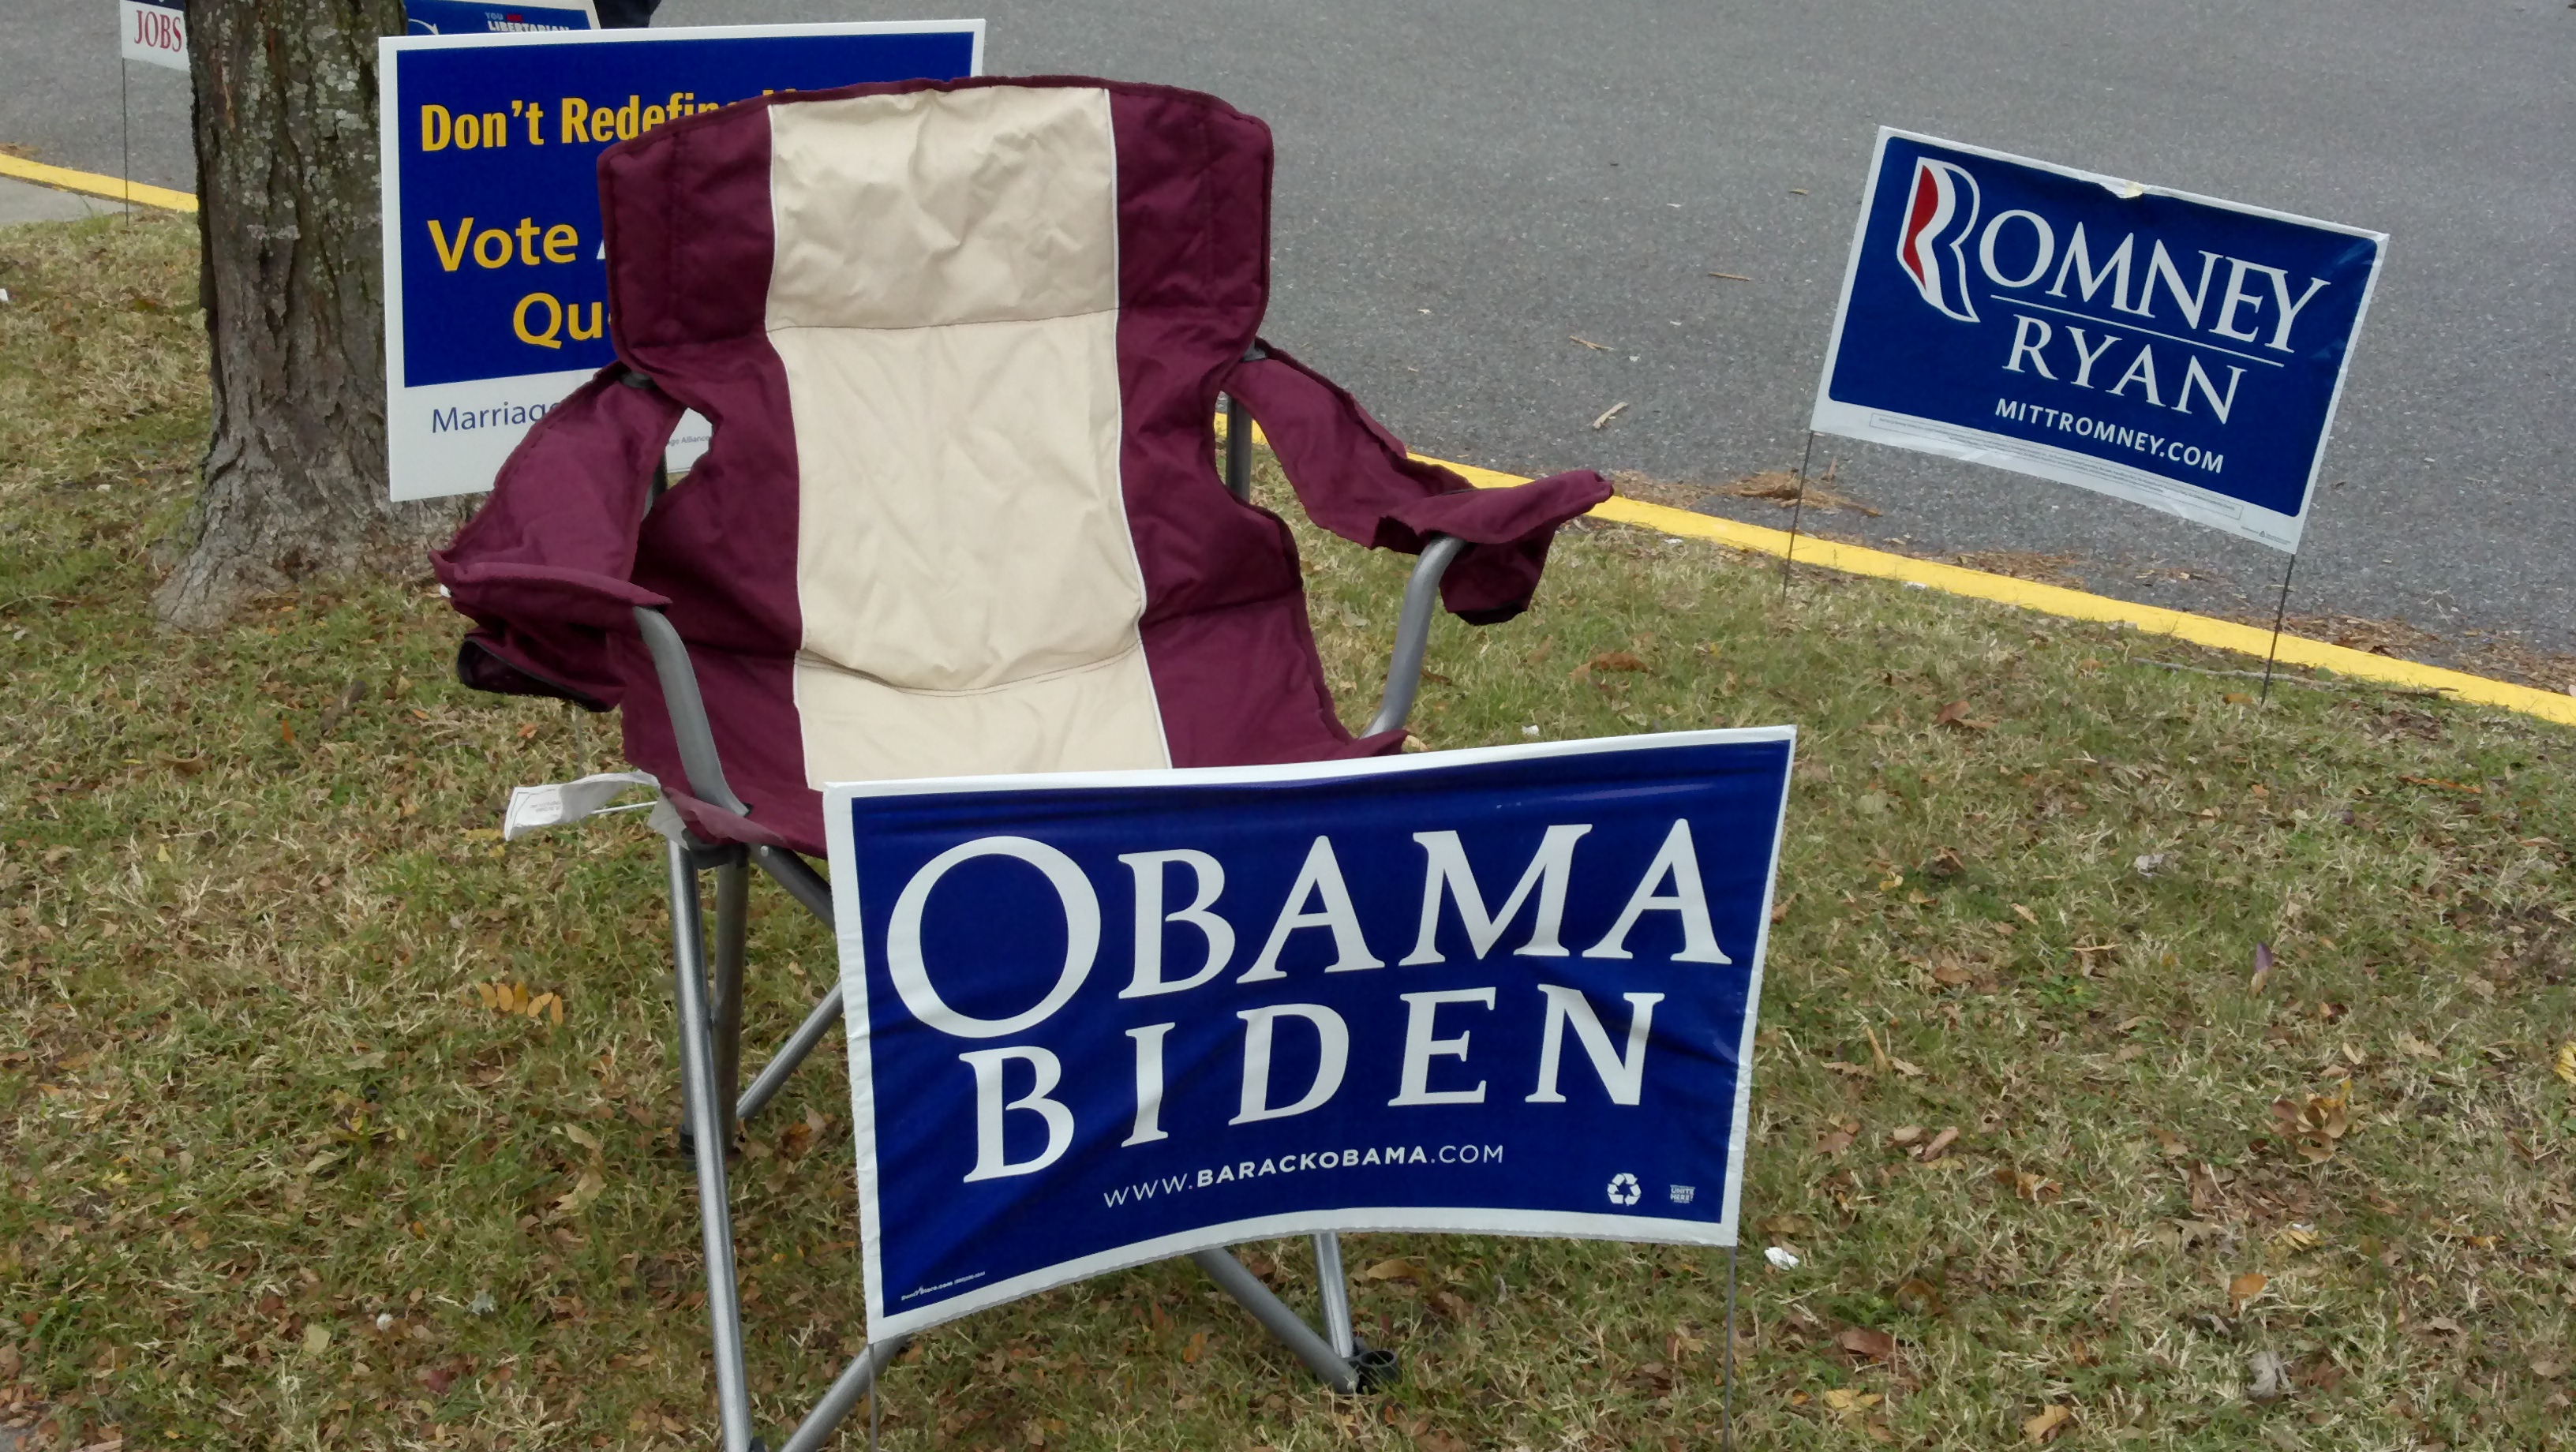 Obama's empty chair in full force.